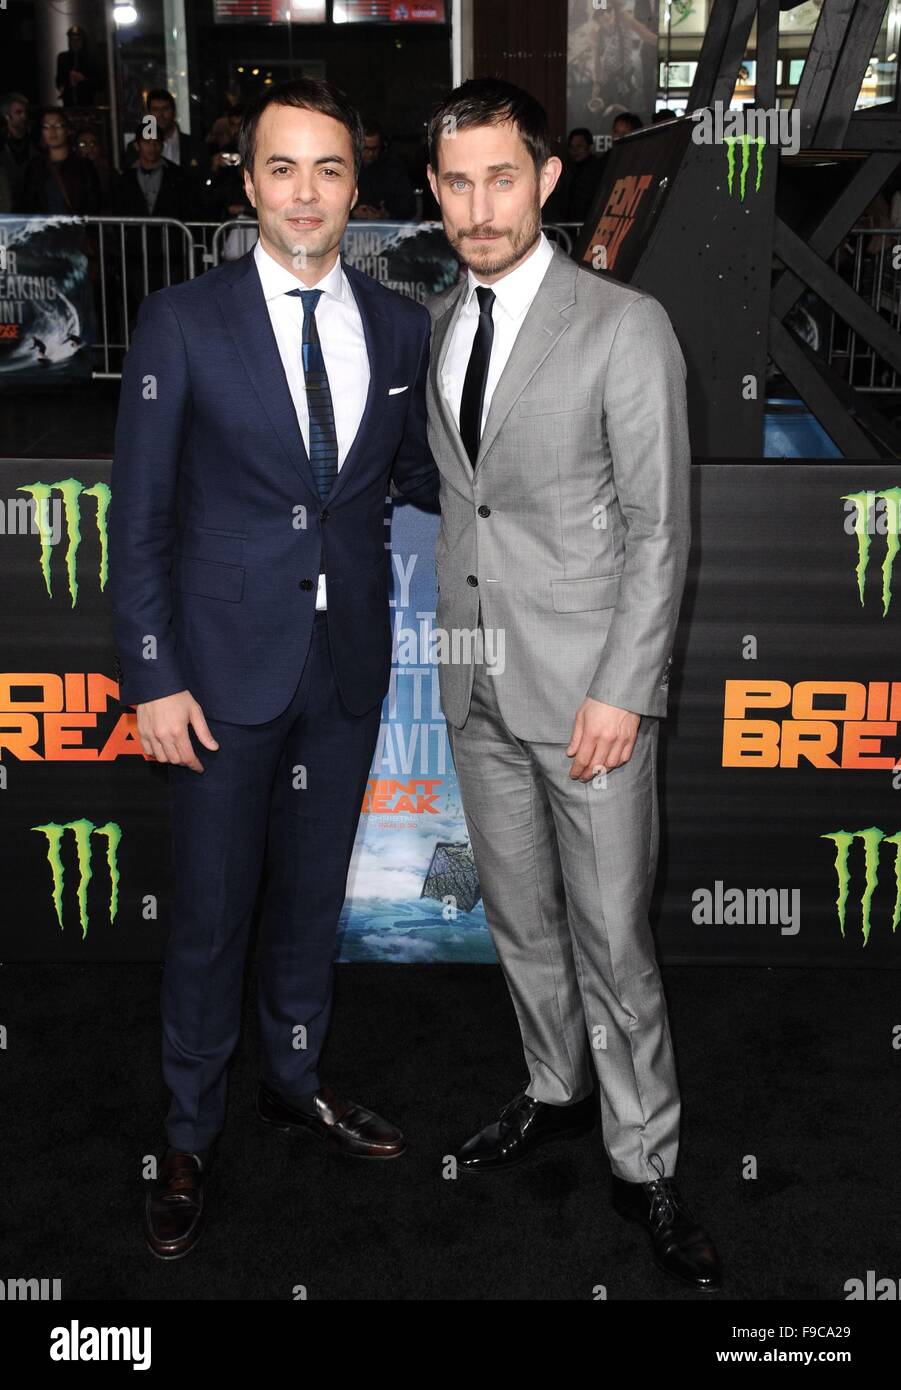 Los Angeles, CA, USA. 15th Dec, 2015. Nikolai Kinski, Clemens Schick at arrivals for POINT BREAK Premiere, TCL Chinese 6 Theatres (formerly Grauman's), Los Angeles, CA December 15, 2015. Credit:  Dee Cercone/Everett Collection/Alamy Live News Stock Photo